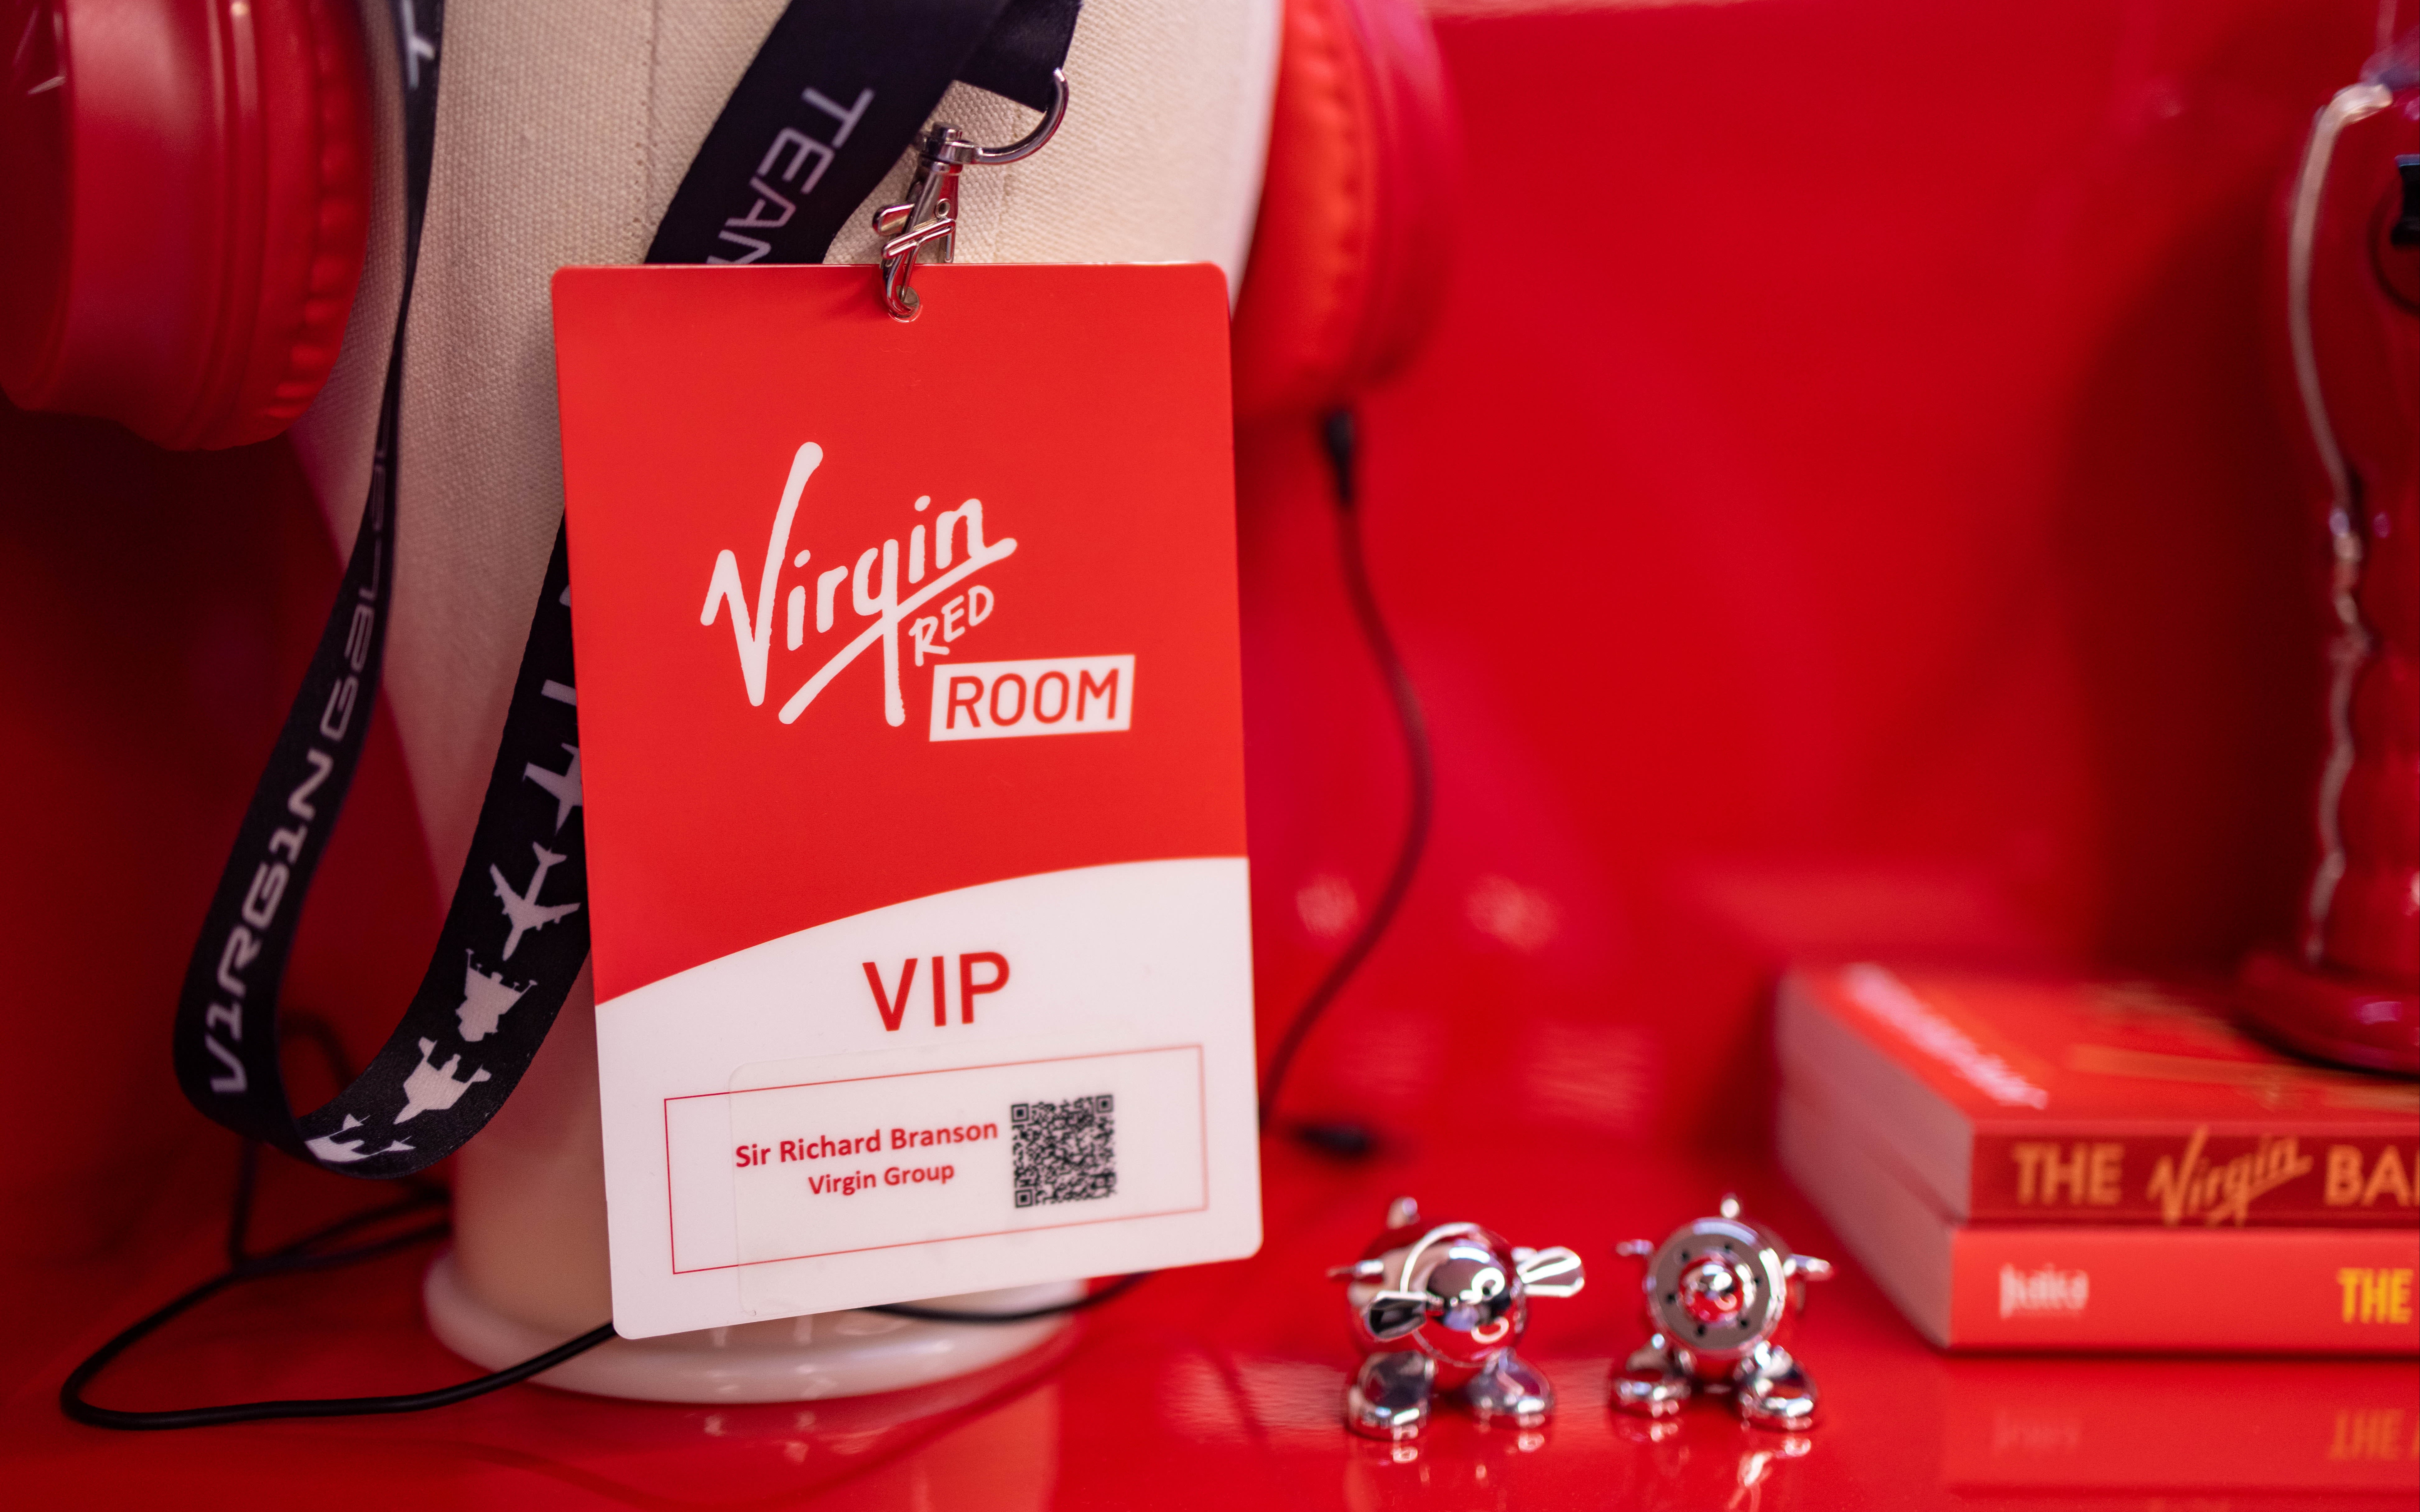 Image of a VIP pass for the Virgin Red Room in Manchester's AO Arena